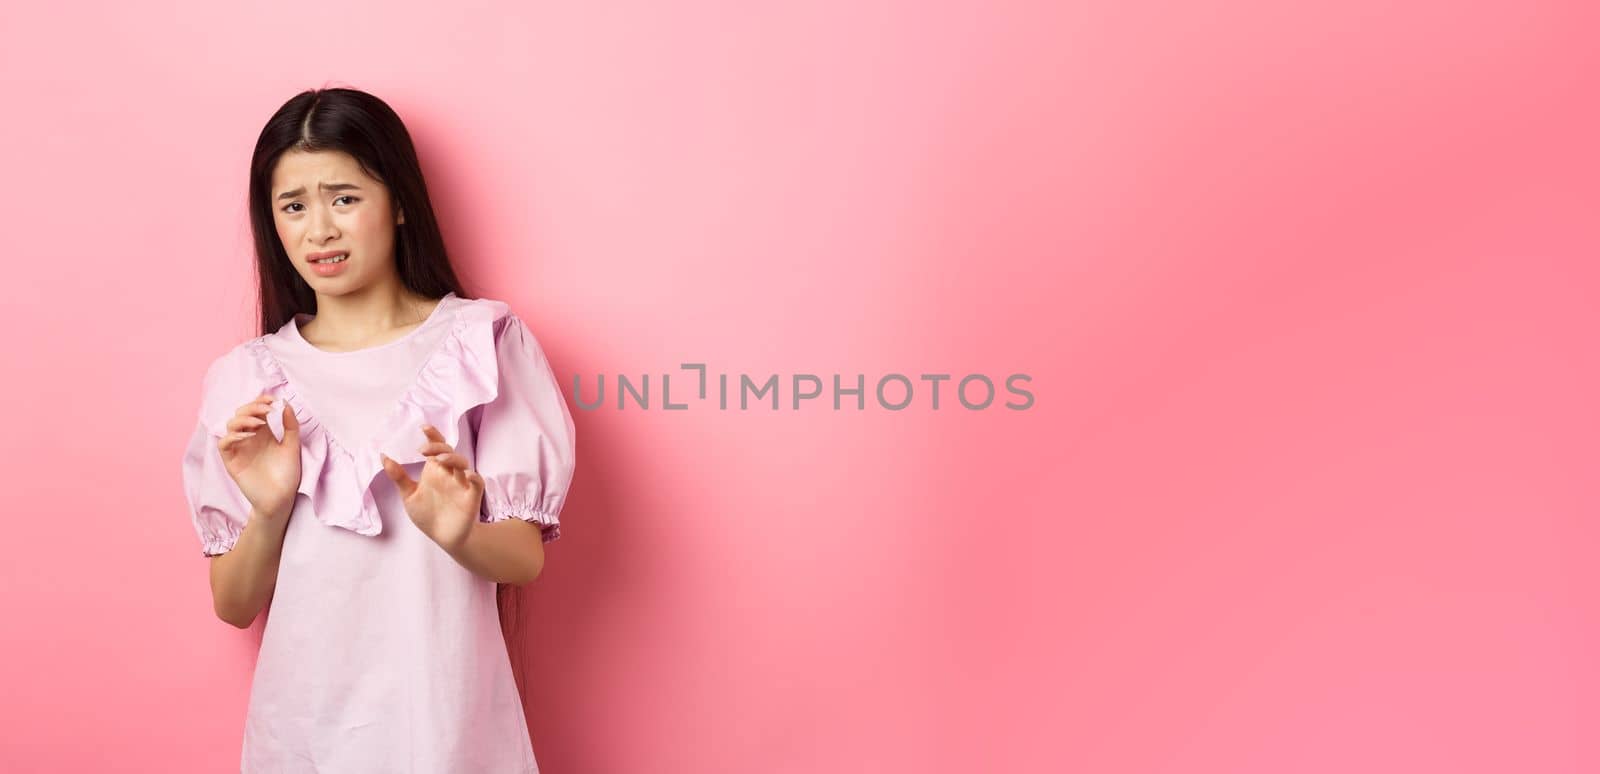 Stay away from me. Disgusted asian girl raising hands to block someone, cringe from aversion, look reluctant and asking to stop, rejecting something bad, pink background.